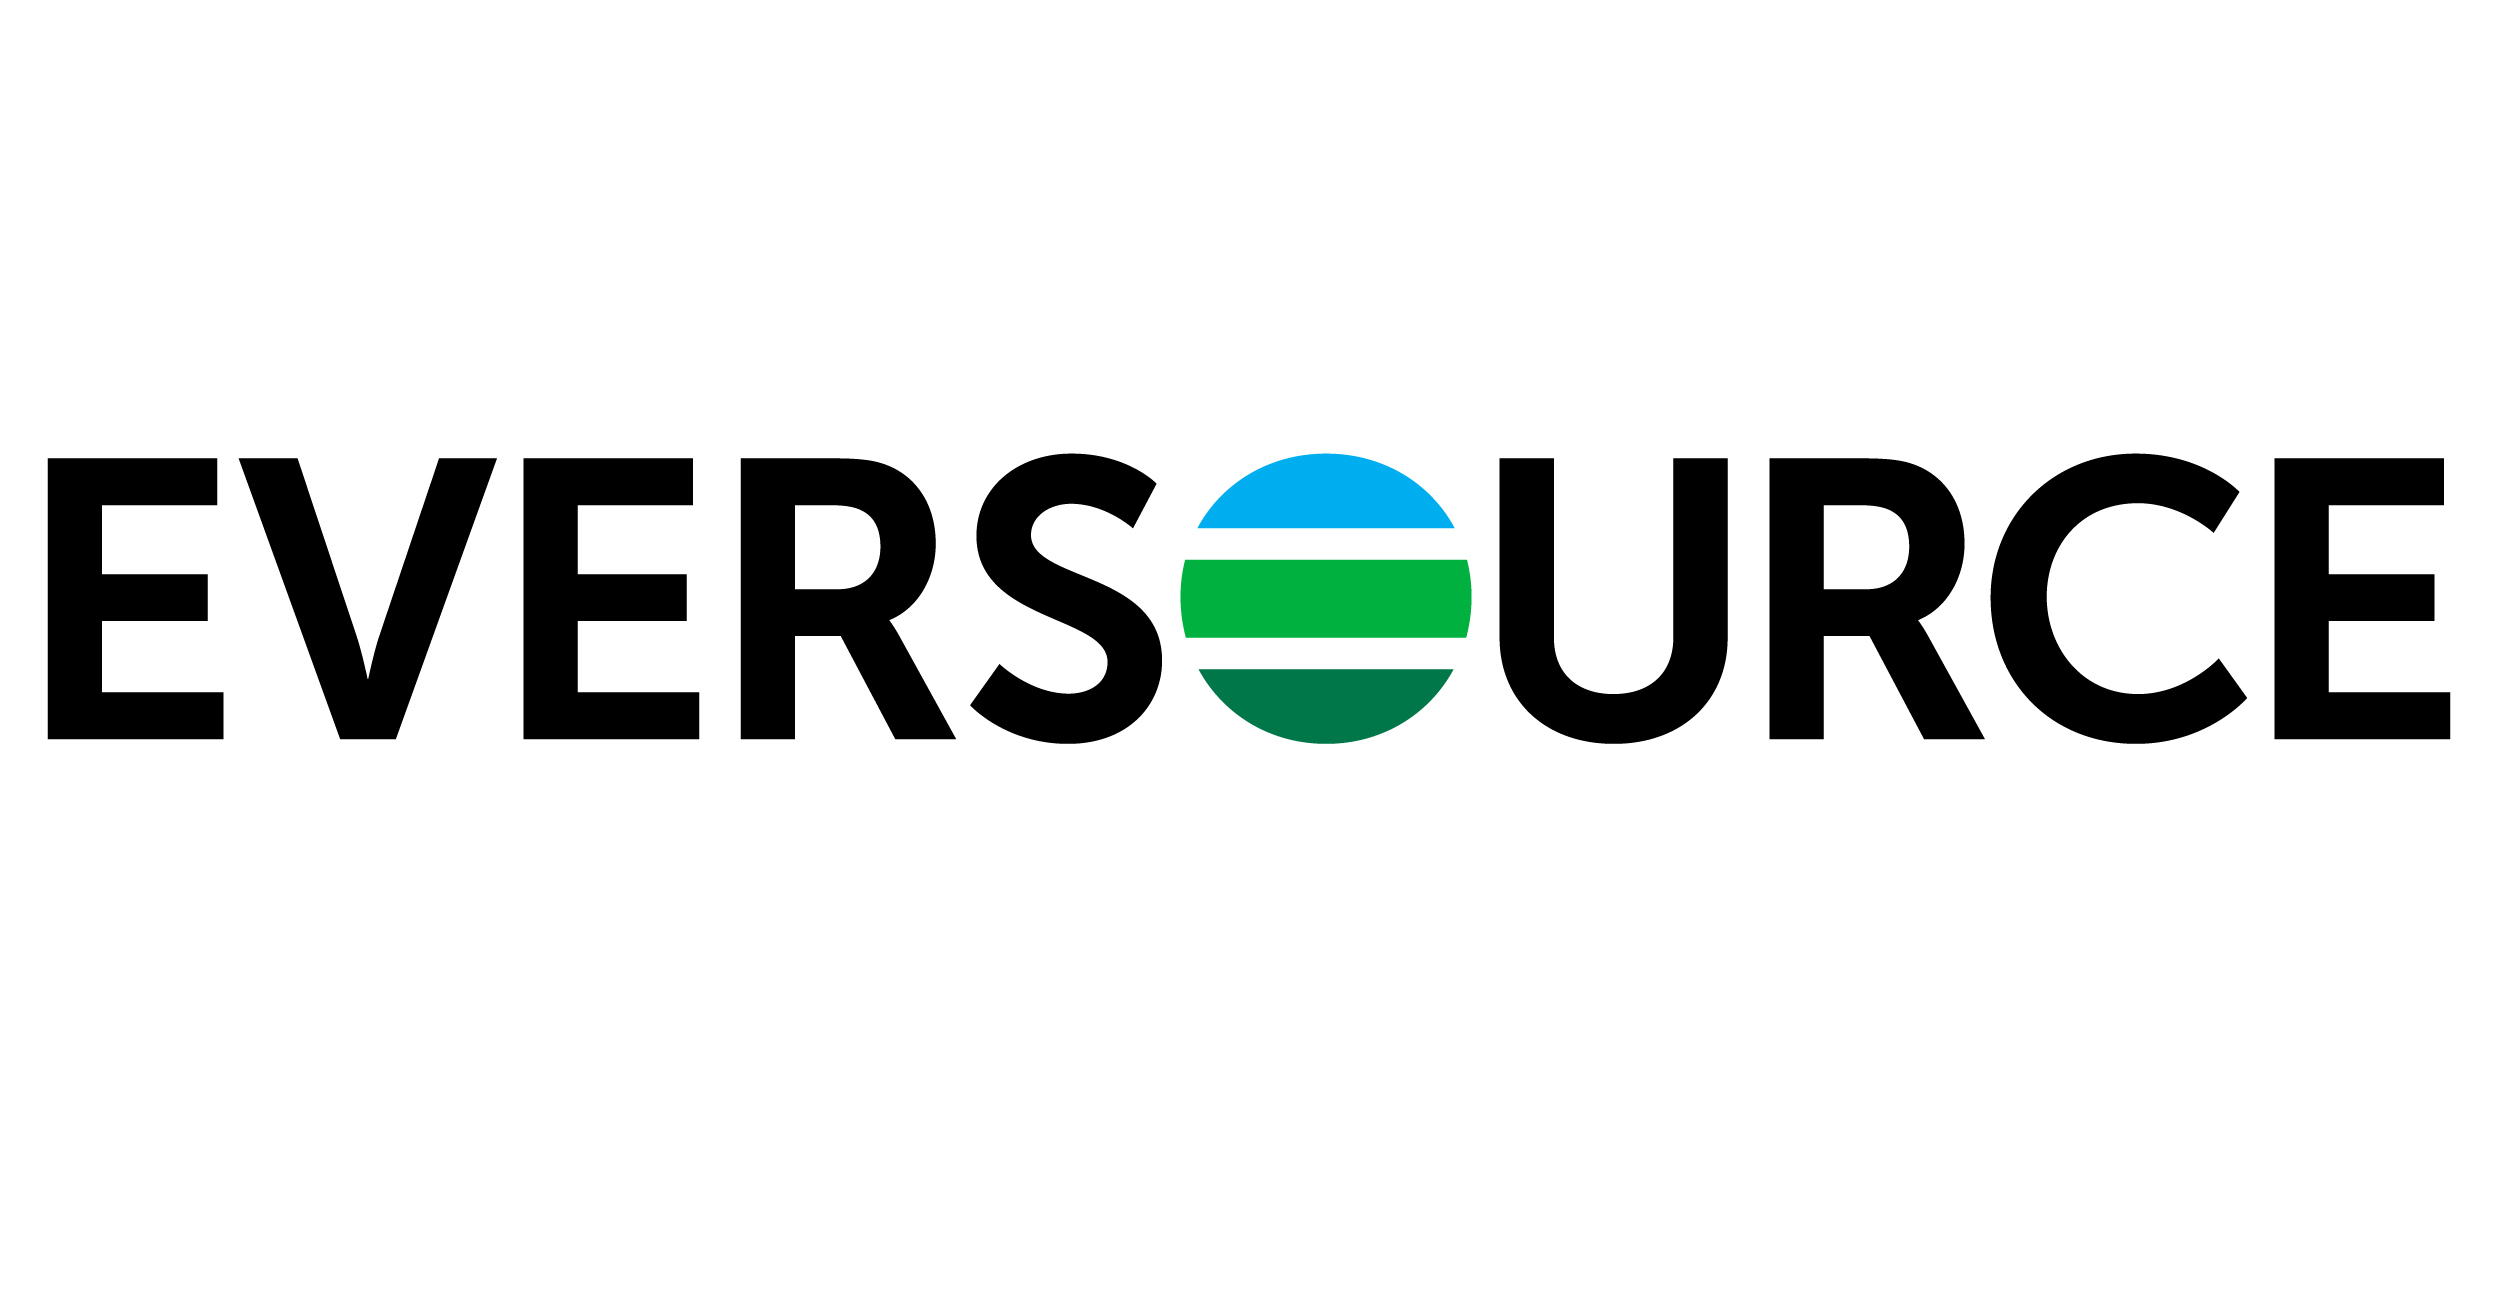 Manager, Energy Efficiency, Channel Team at Eversource